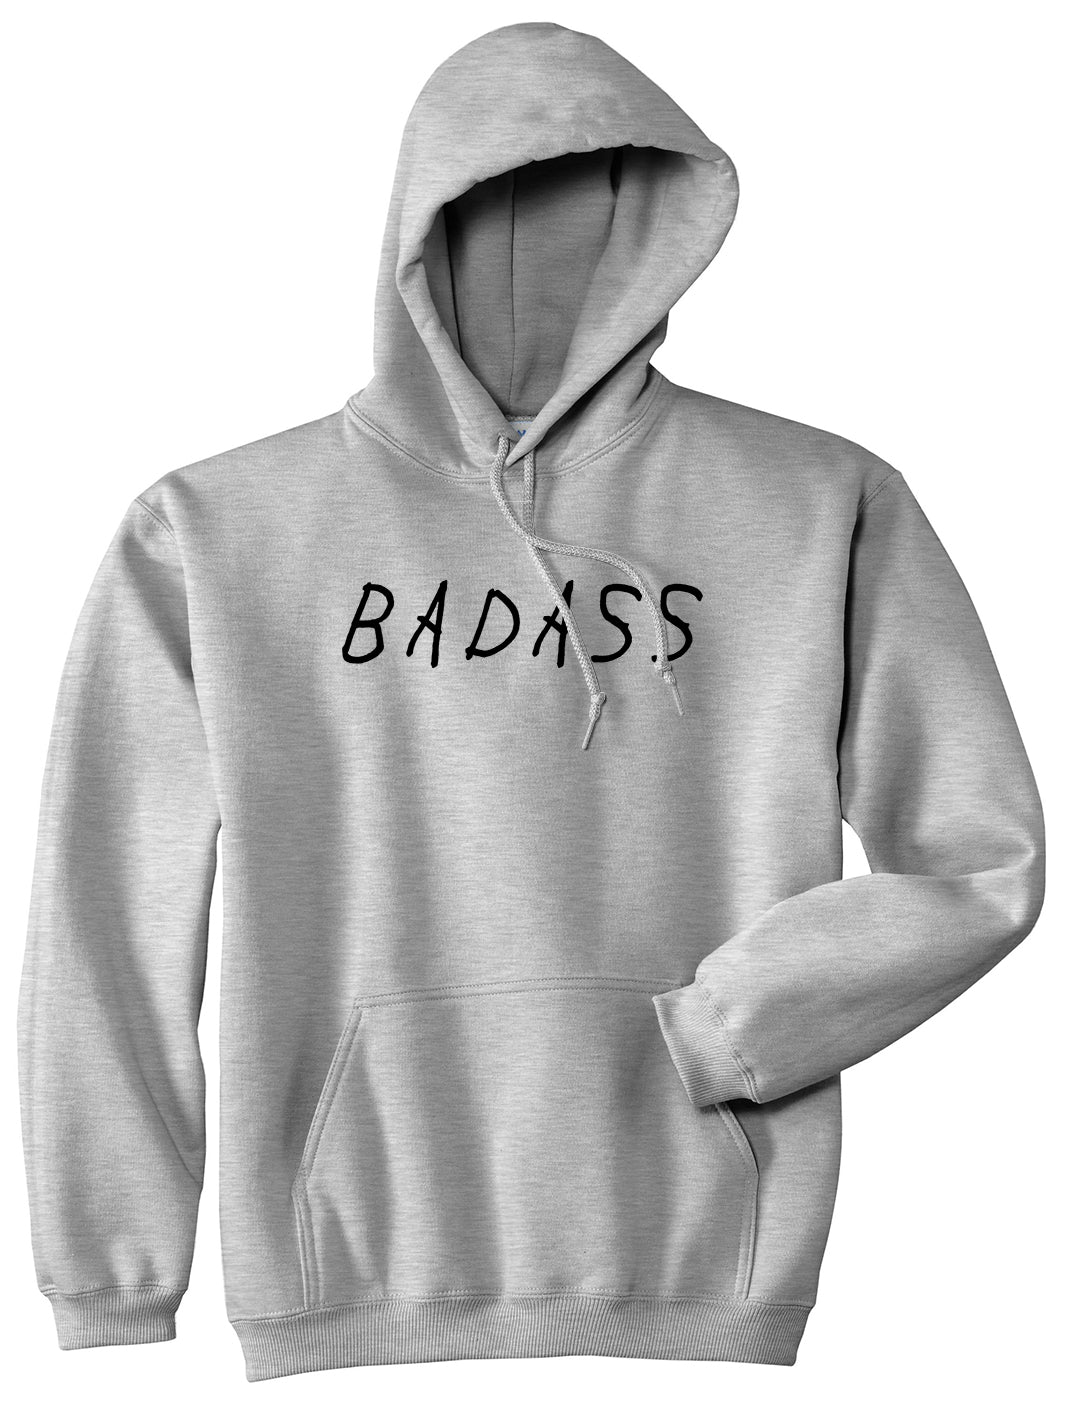 Badass Grey Pullover Hoodie by Kings Of NY